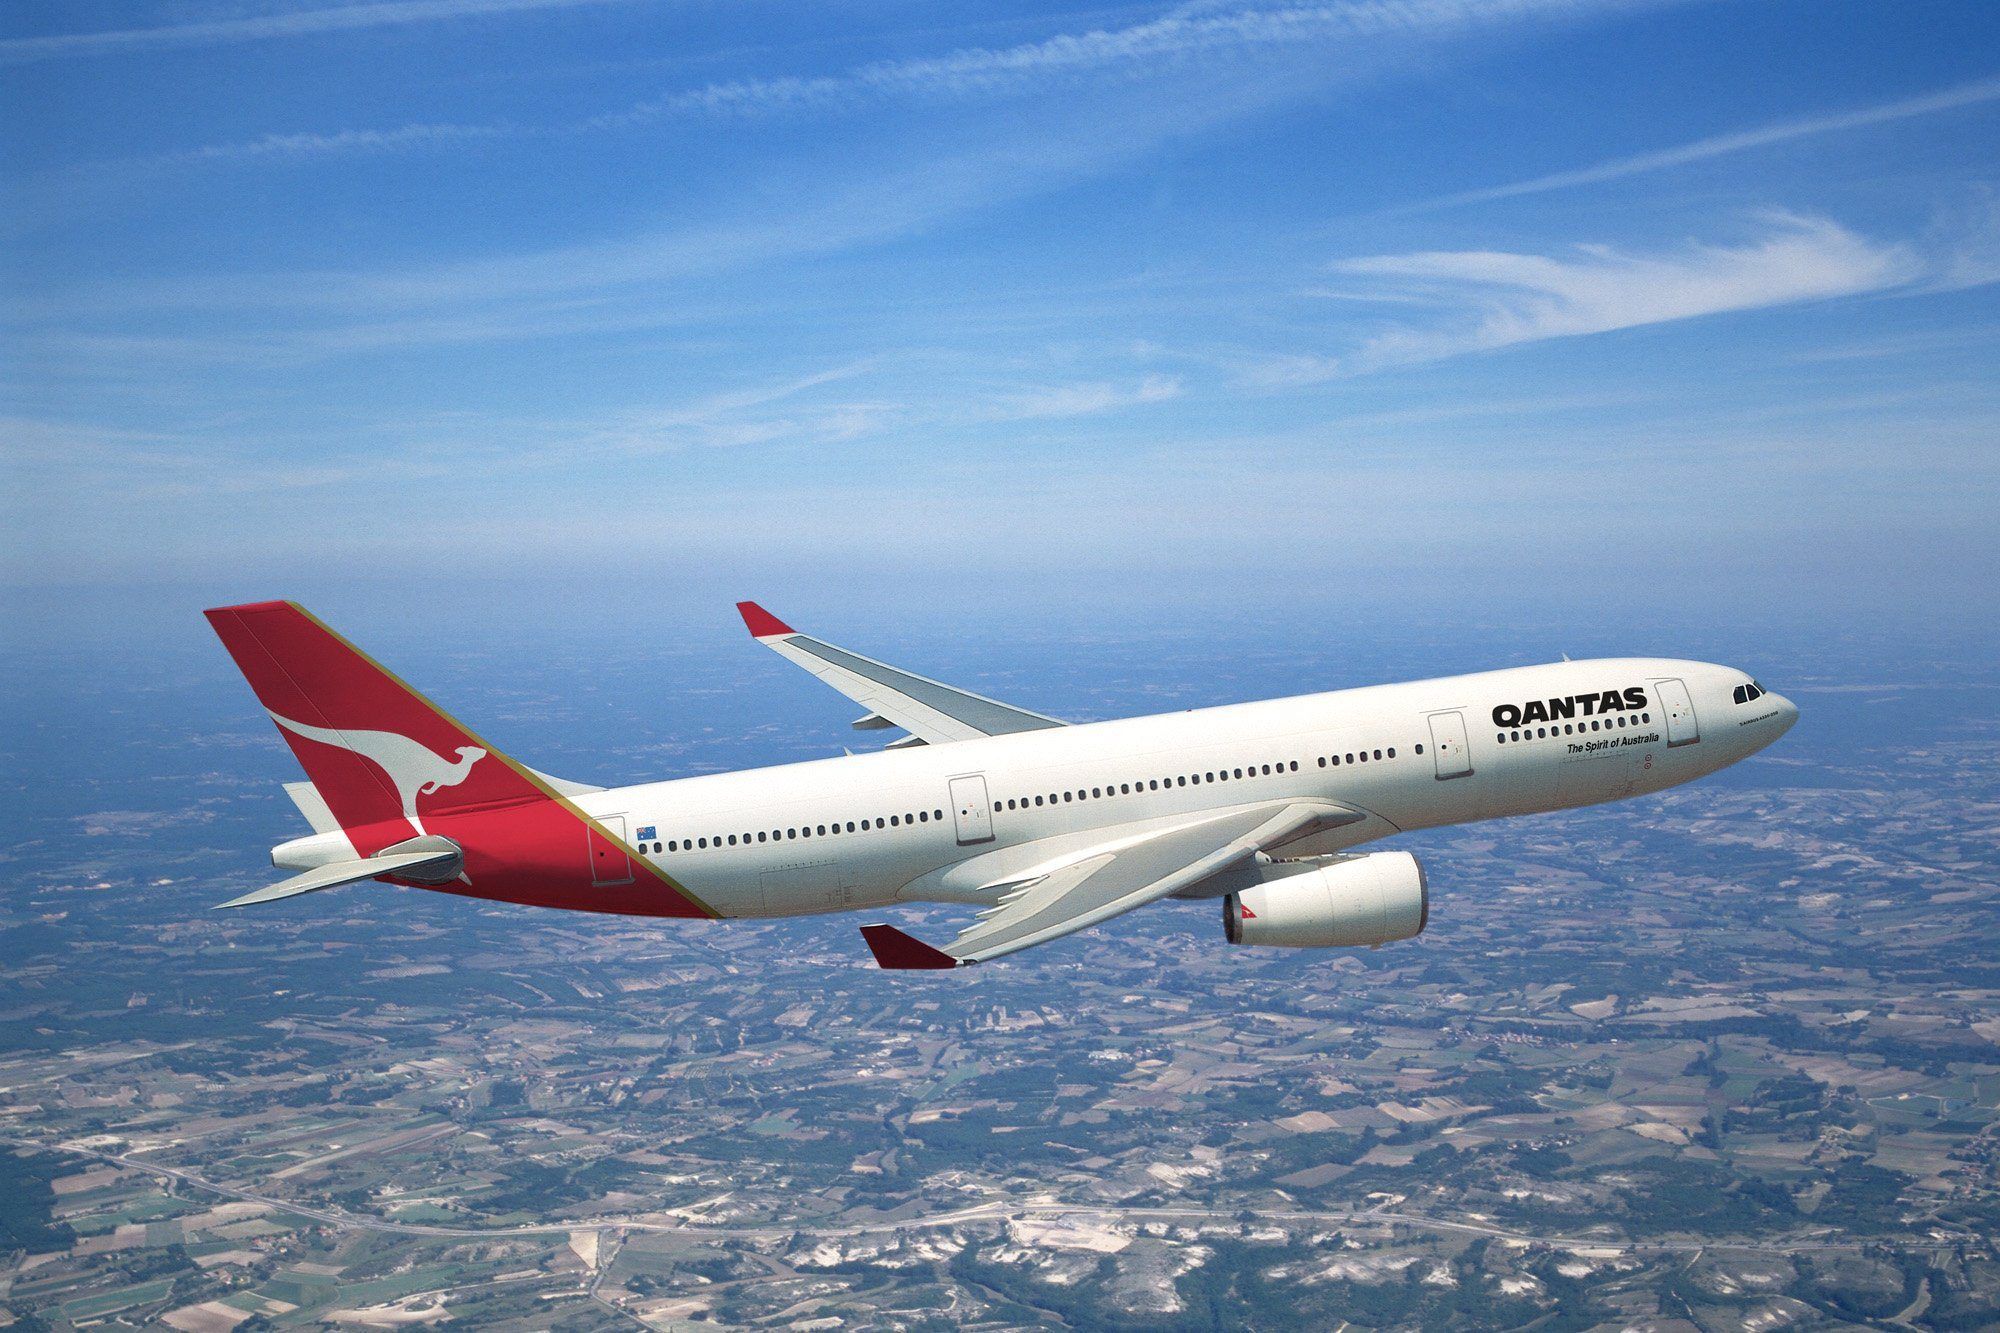 Airbus A330-200 flying with Qantas Airways livery